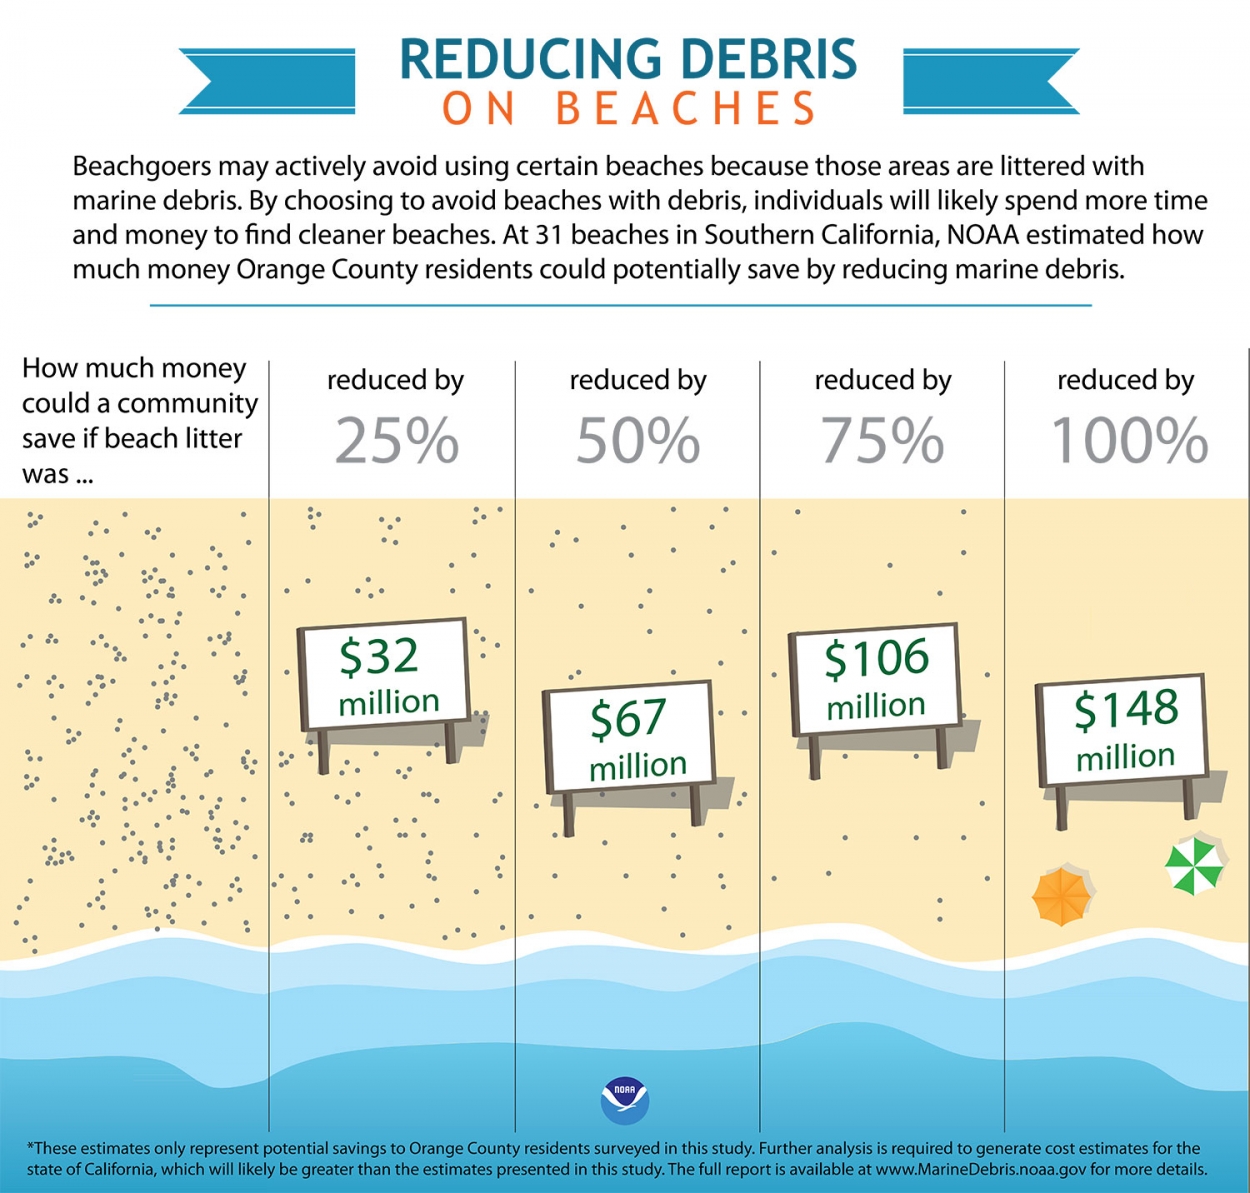 An infographic depicting how much money communities can save by reducing marine debris on beaches. 